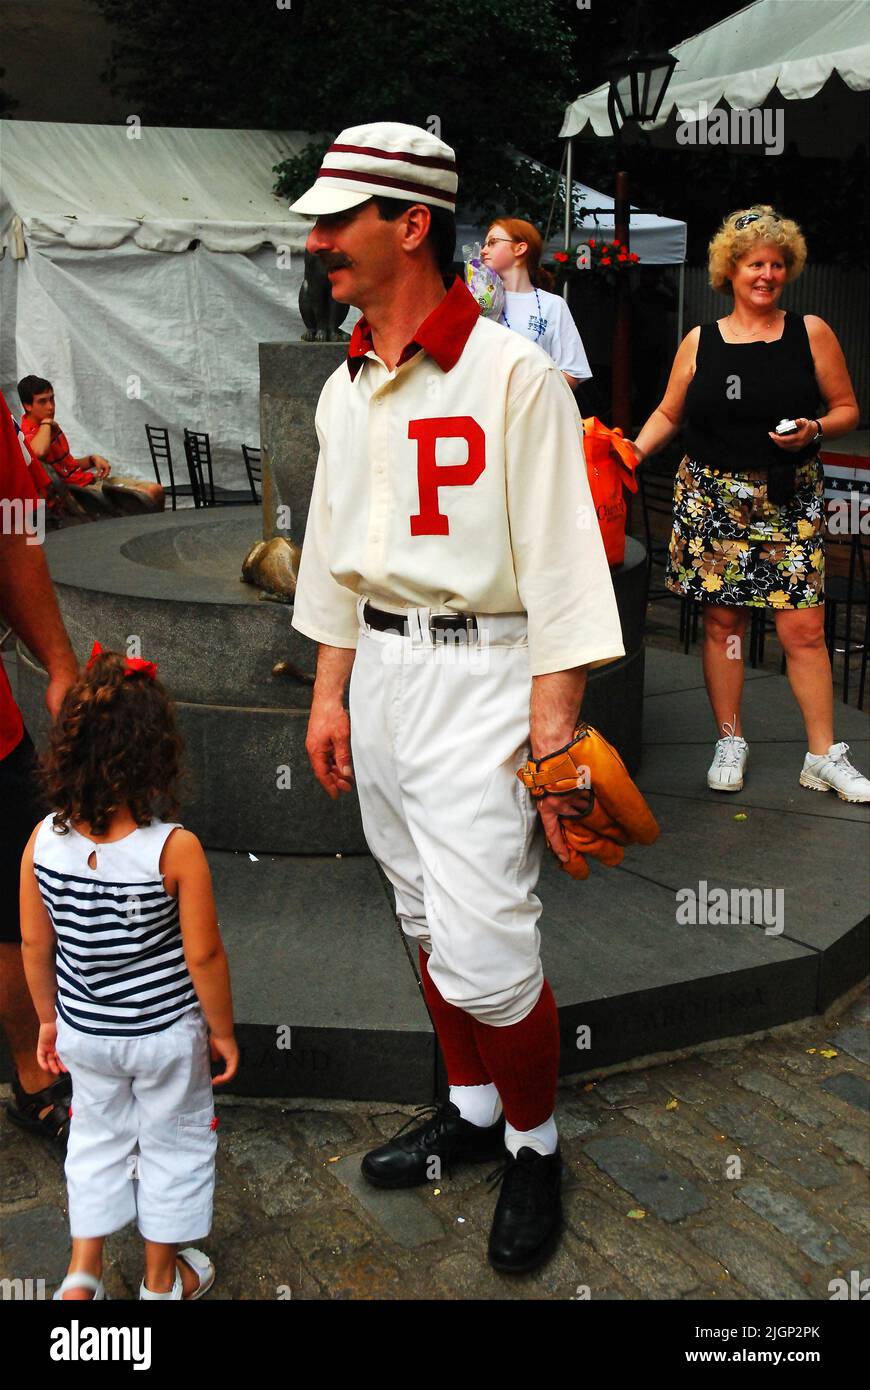 An adult man dresses in a Old Time Baseball uniform costume teaching children of the sport during the turn of the 20th Century in Philadelphia Stock Photo